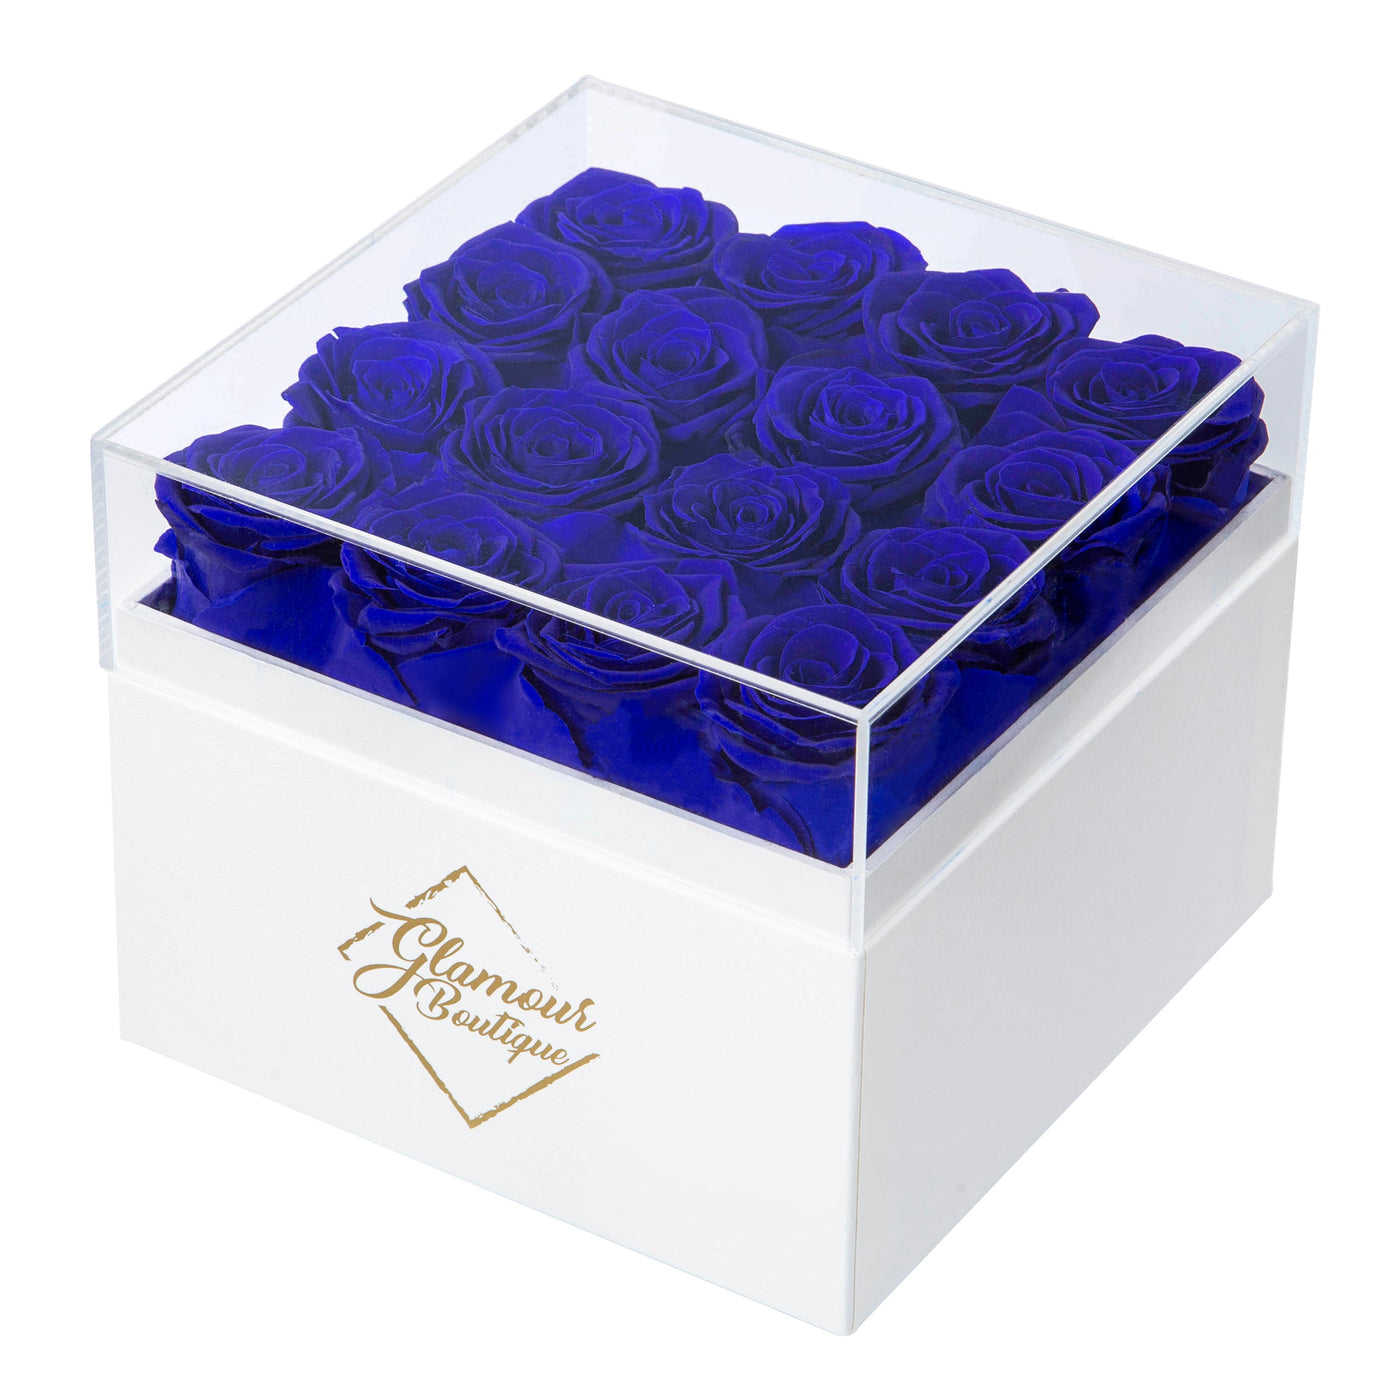 16 Preserved Roses Cased in White Box with Acrylic Cover - Sapphire